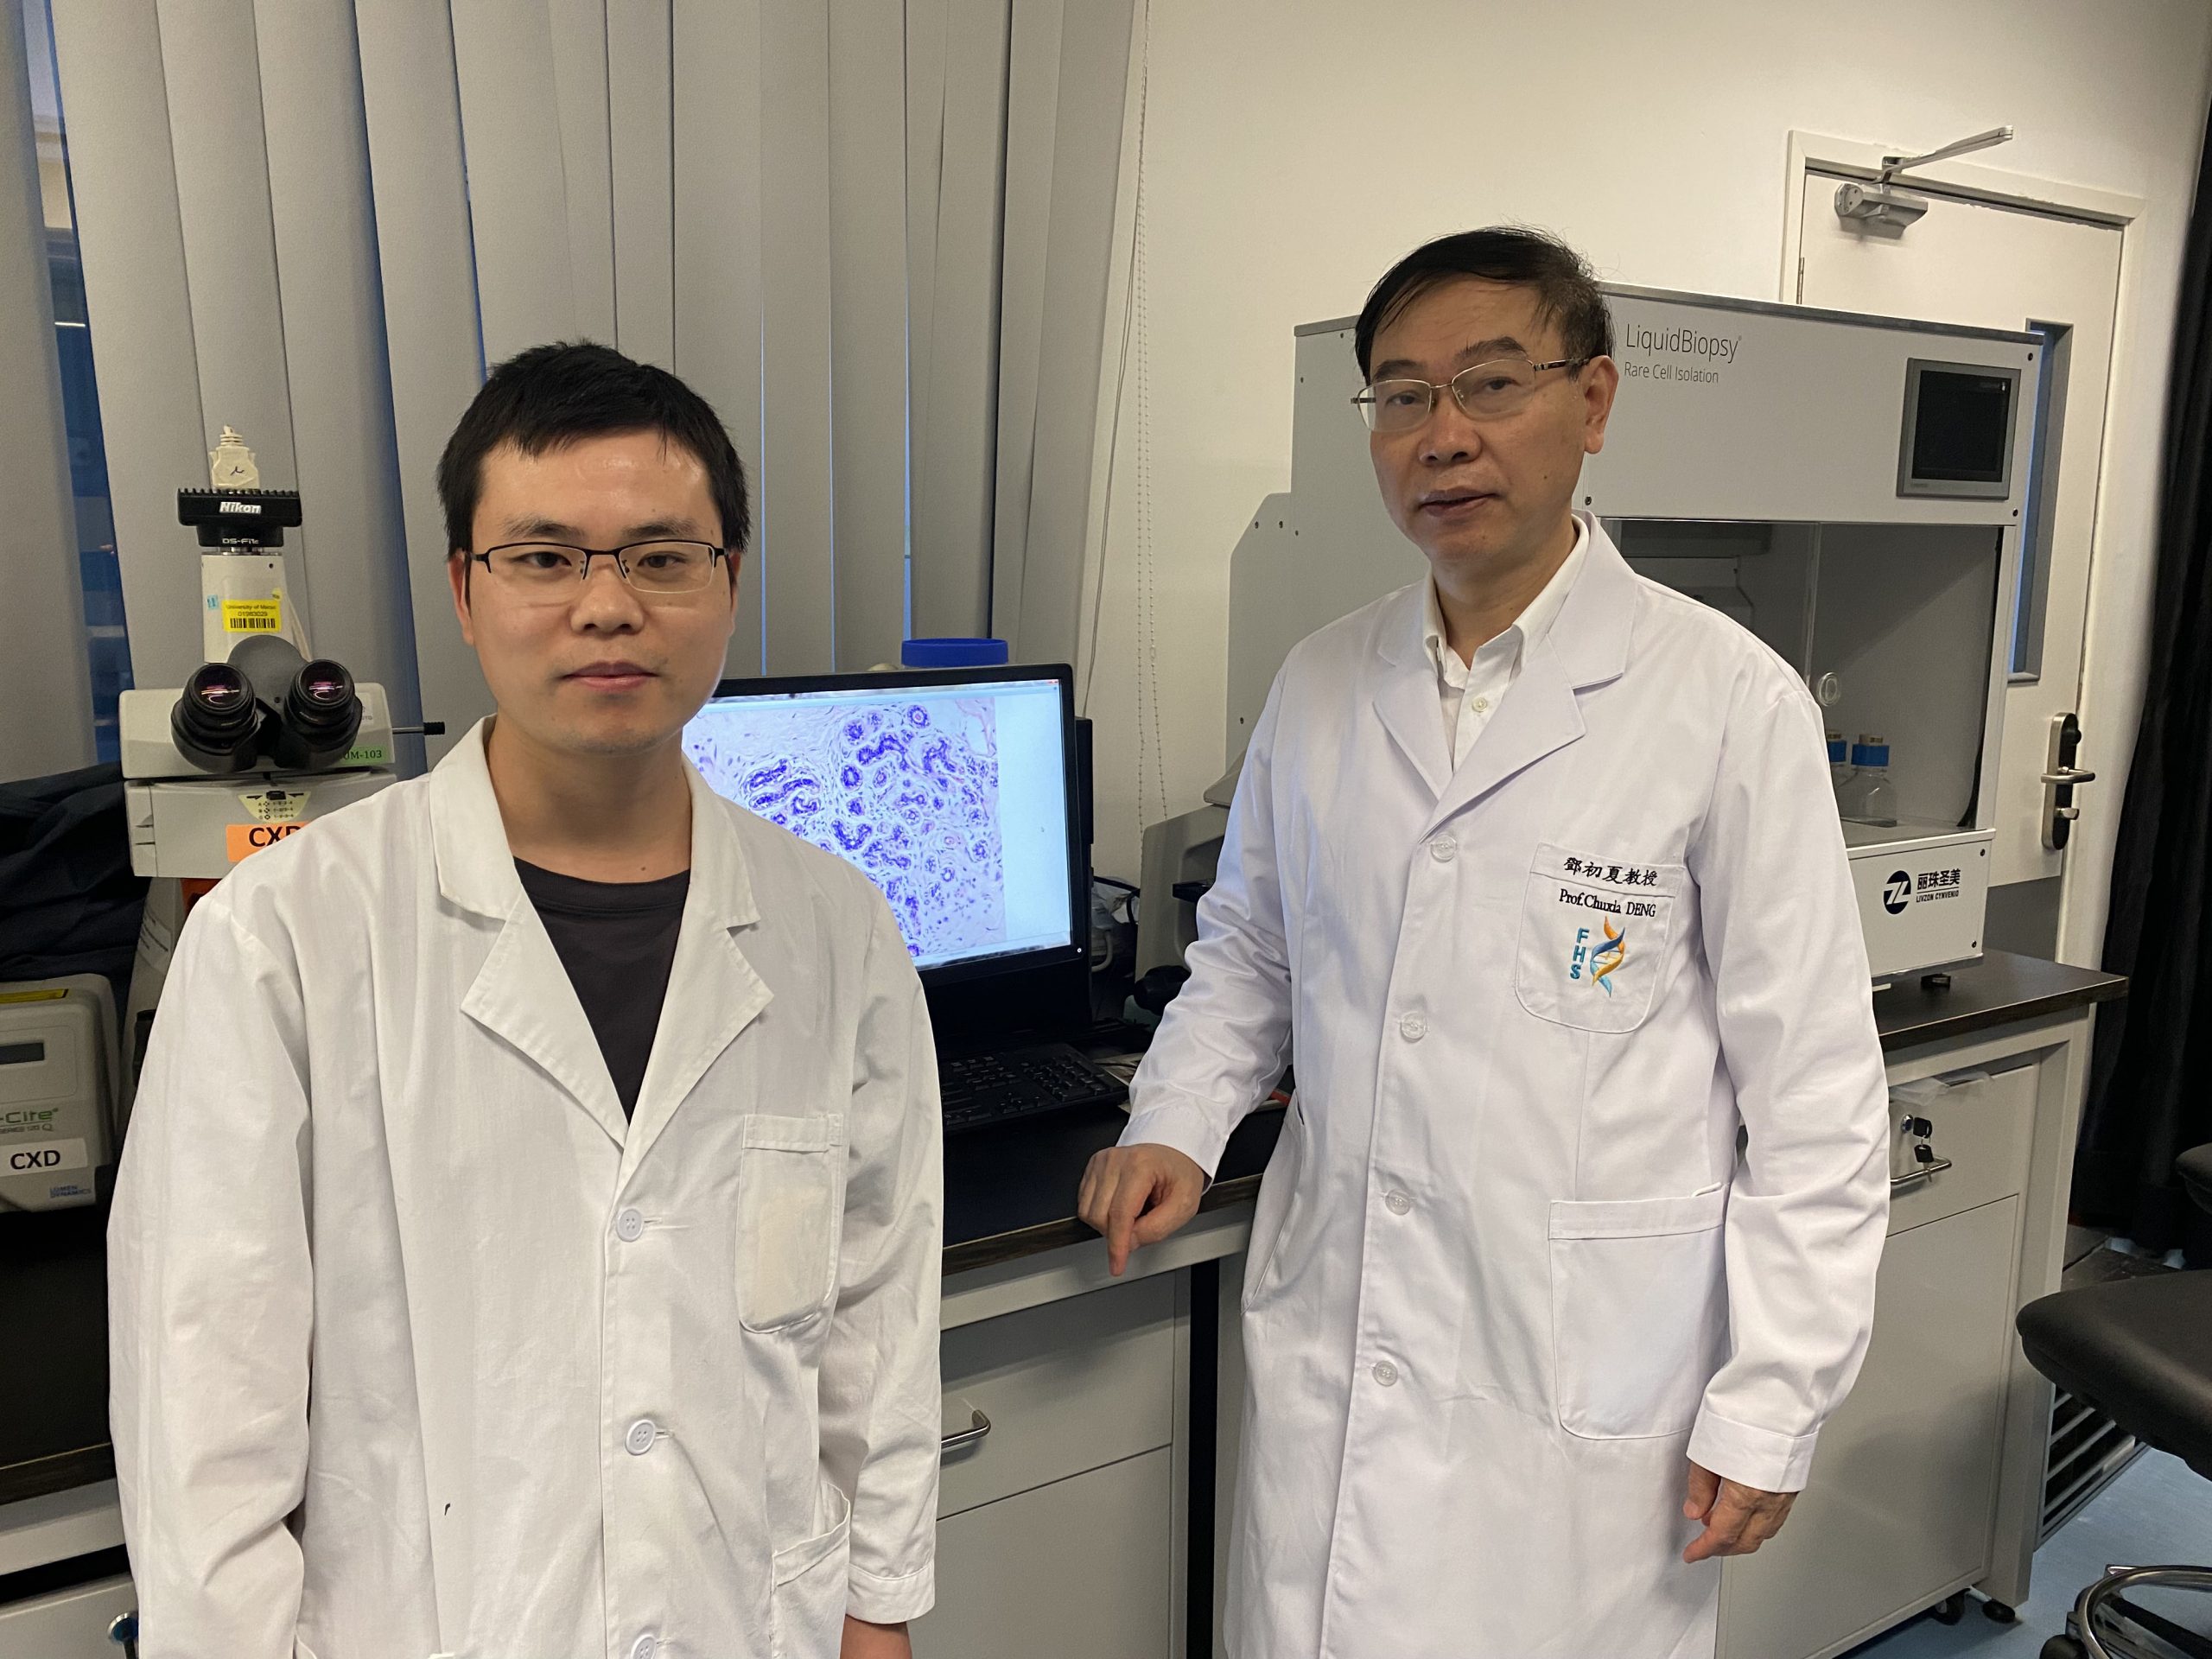 UM breast cancer research breakthrough - Chen Ping and Chuxia Deng